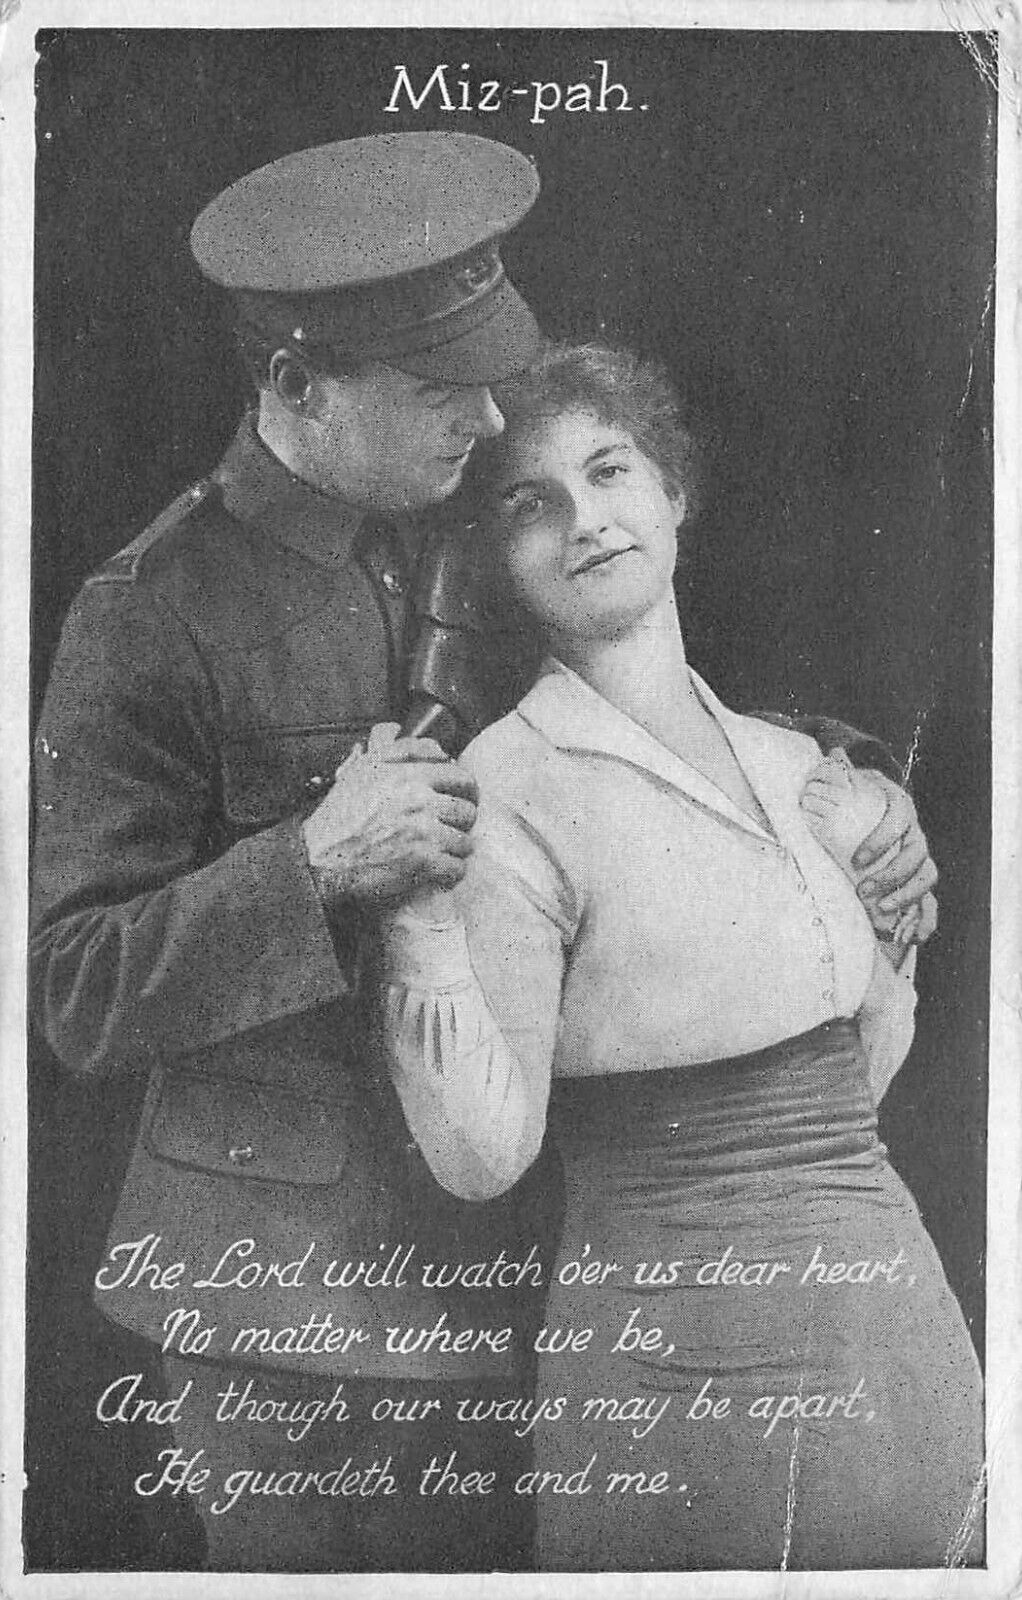 Postcard Romance Soldier Holds His Sweetheart Miz-Pah Divided